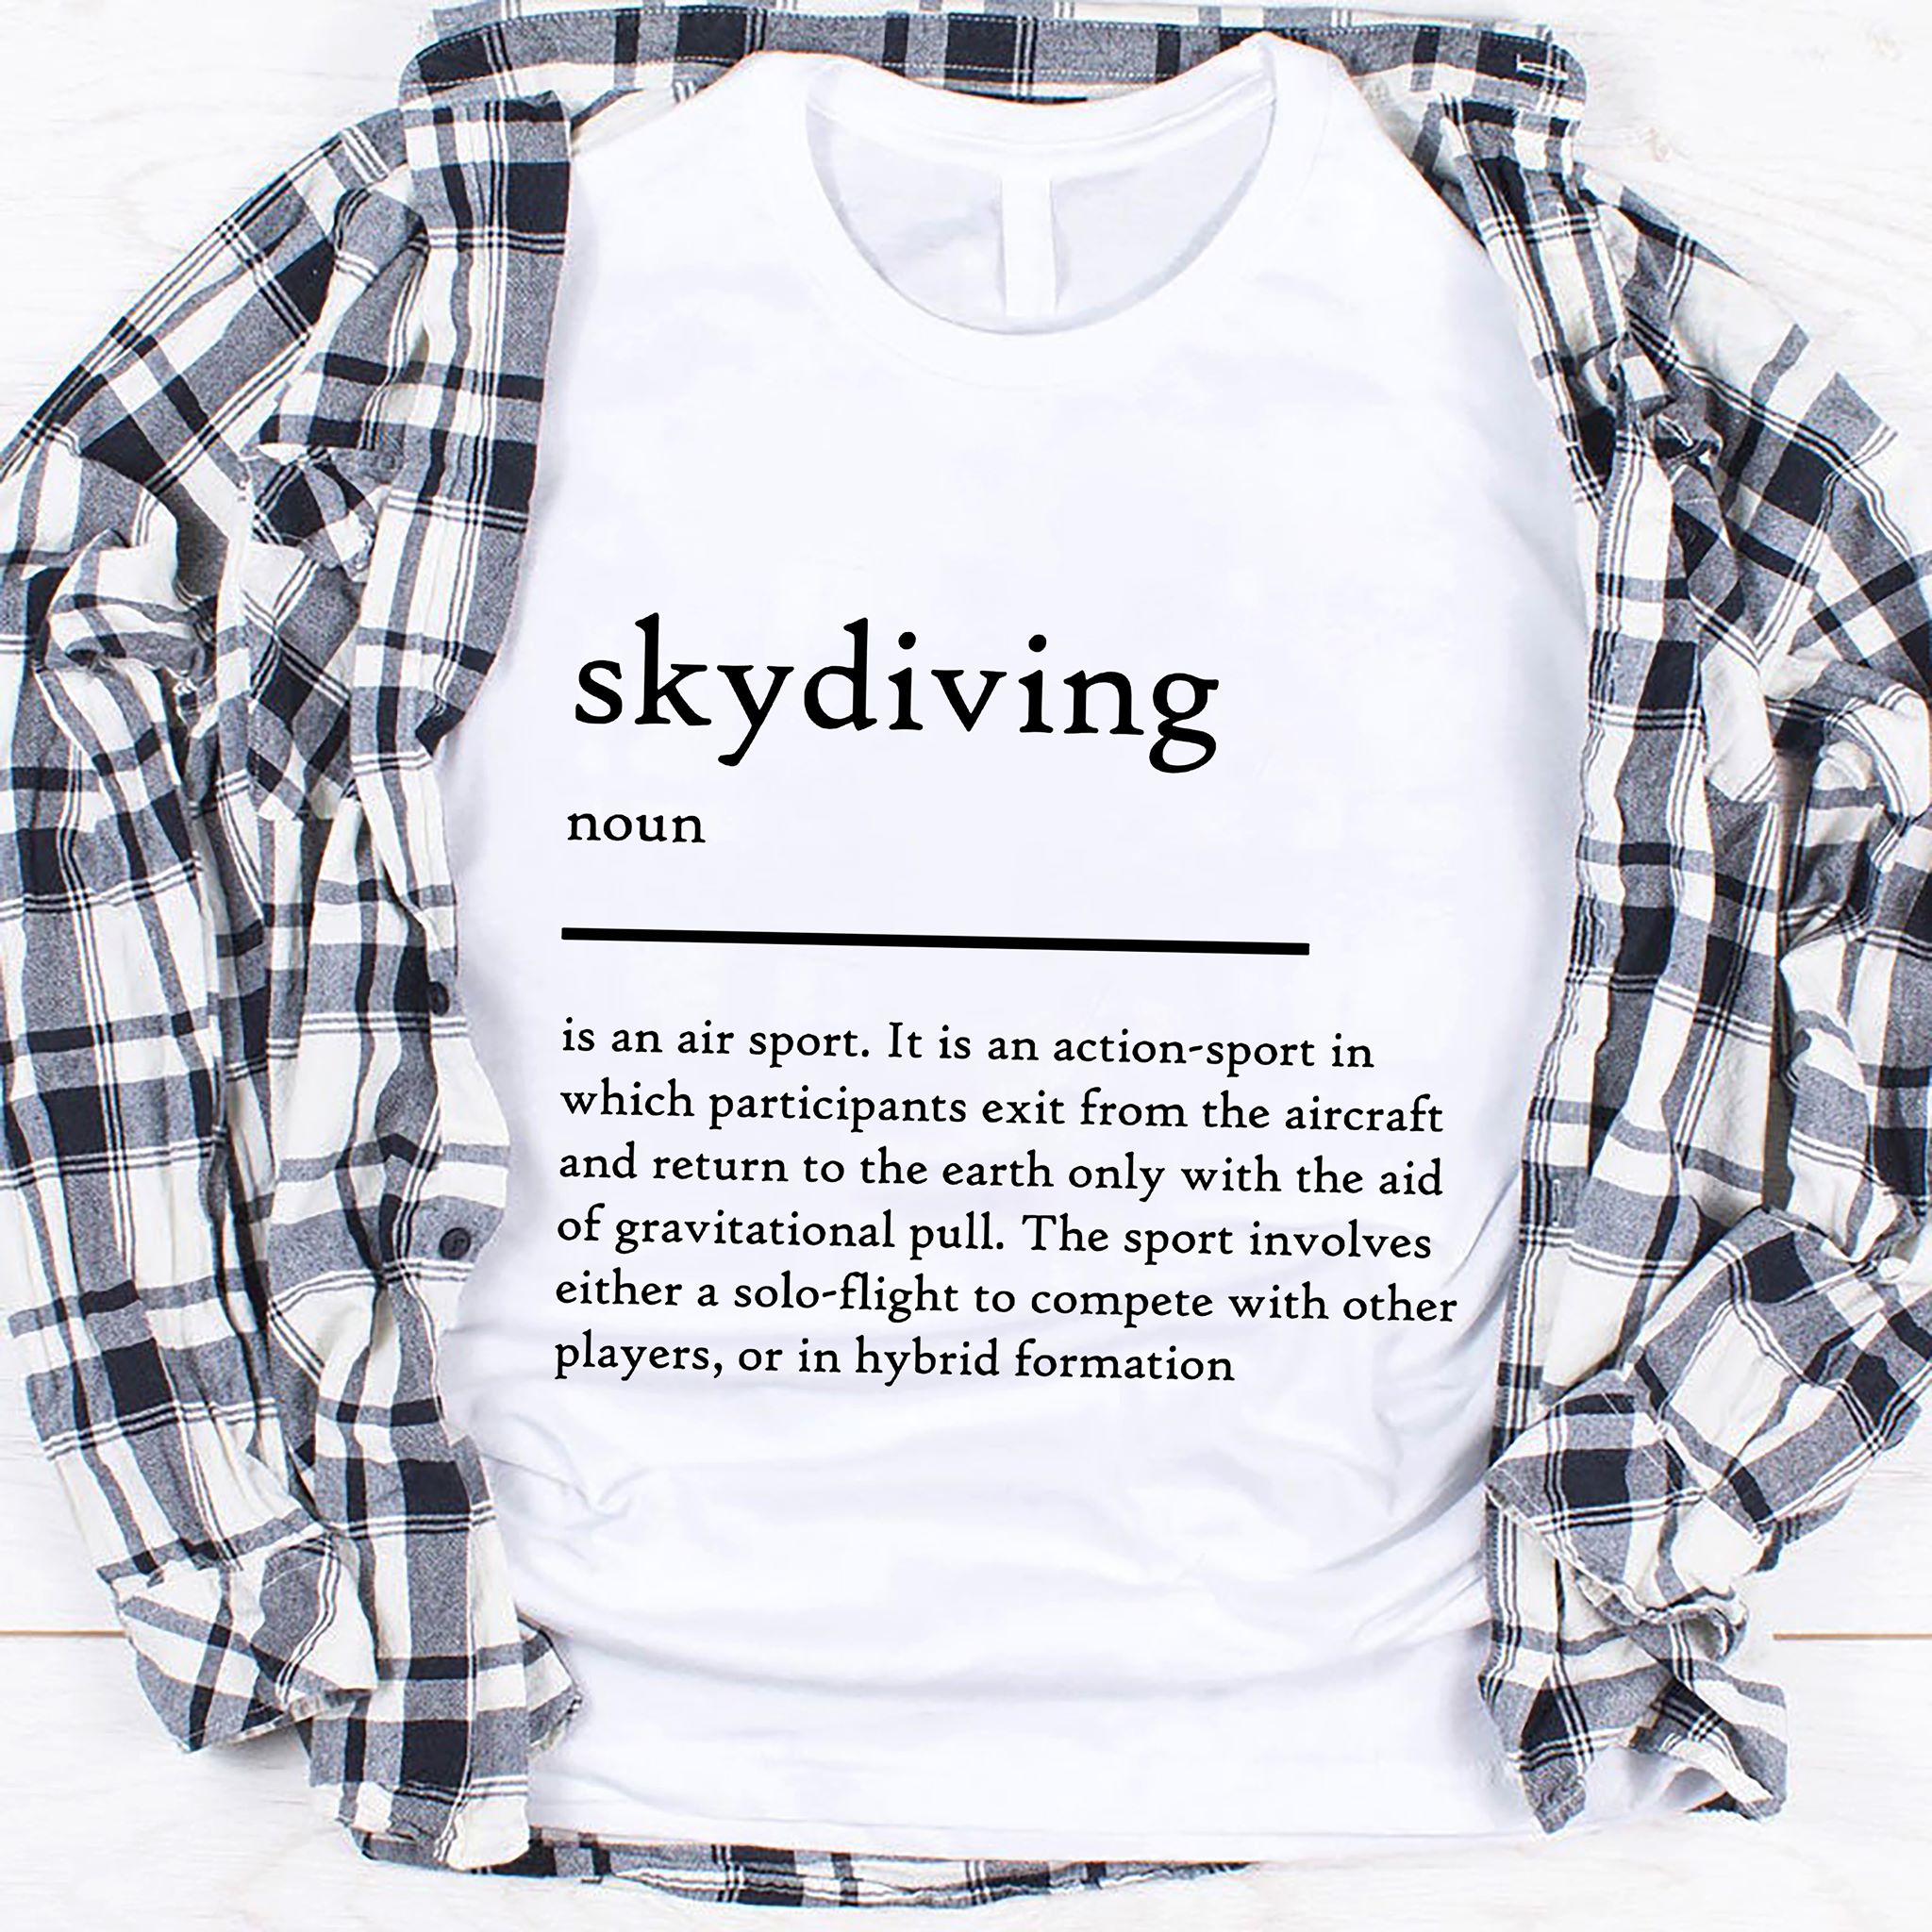 Skydiving is an air sport, an action sport in which participants exit from the aircraft